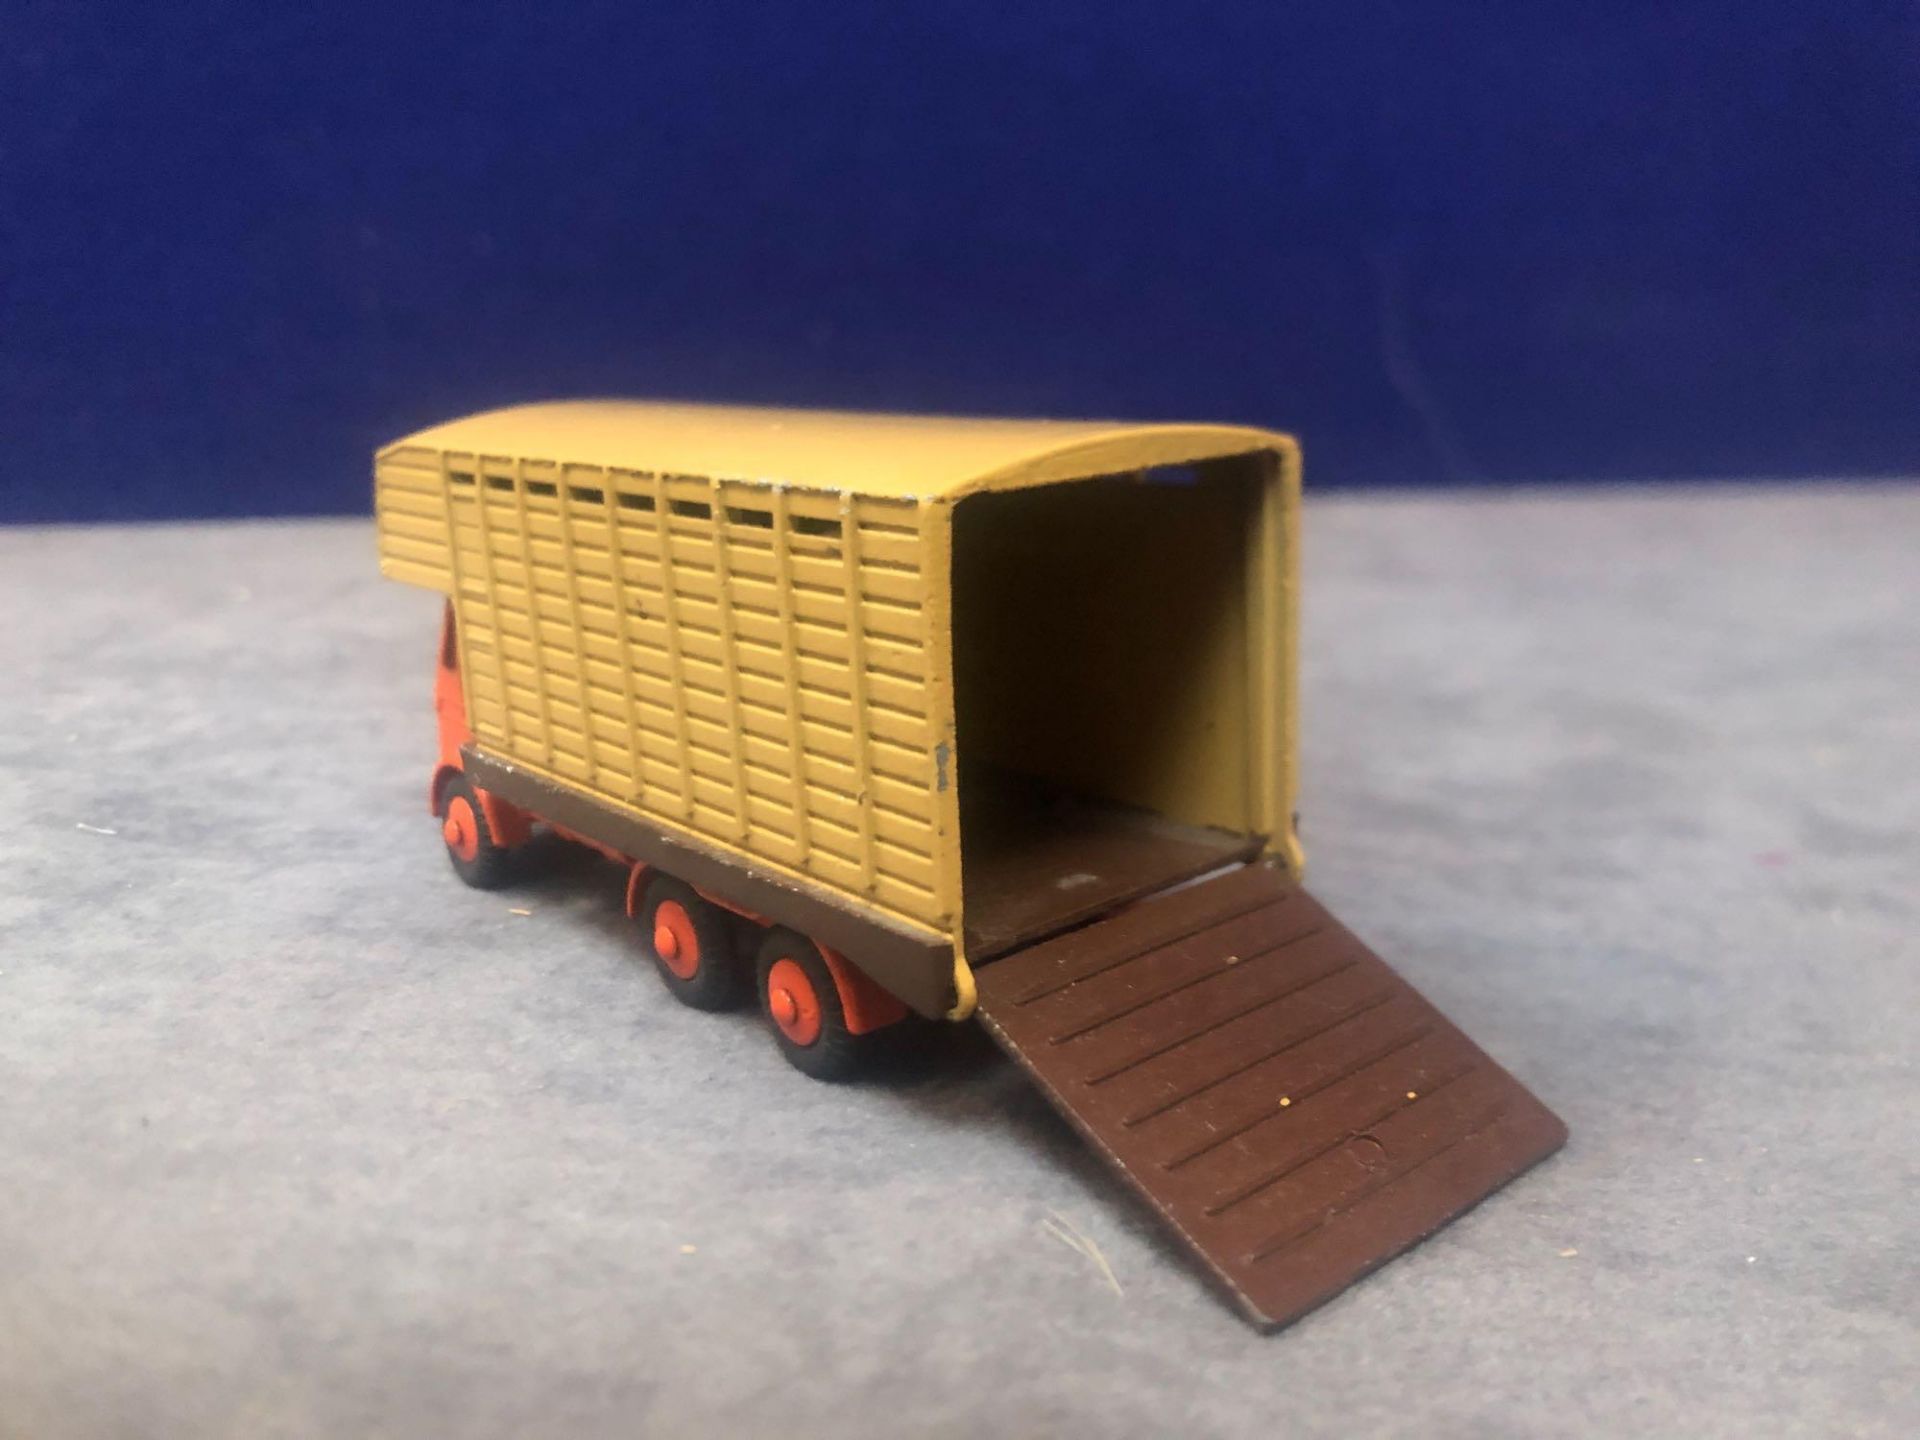 Budgie Toys Rare No.220 Leyland Hippo Cattle Truck Issued 1959-66 Length 97mm Mint Model In Firm Box - Image 3 of 4